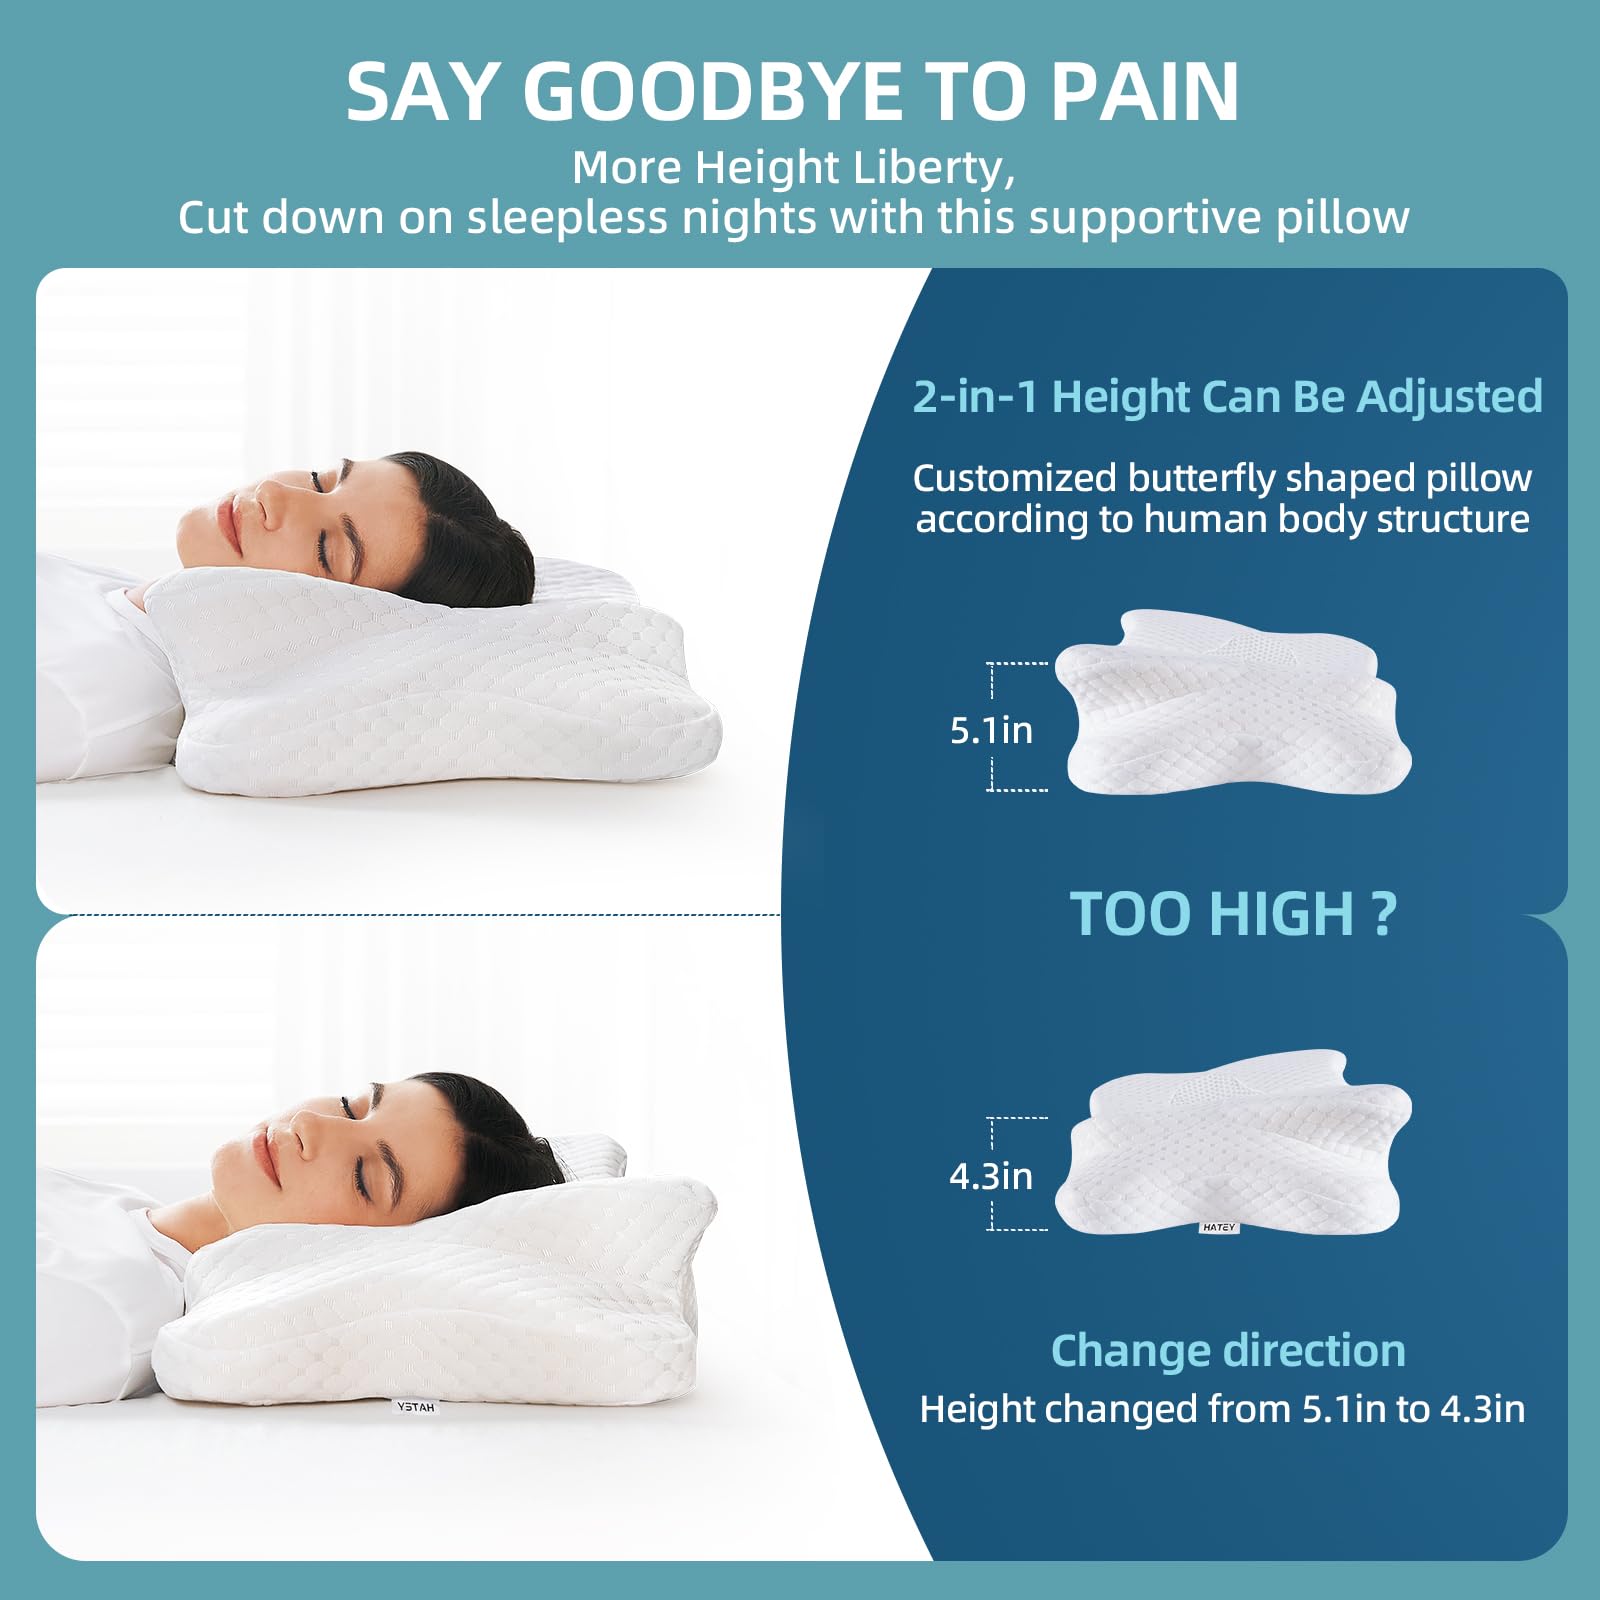 HATEY Neck Pillow for Pain Relief Sleeping, Hollow Design Cervical Memory Foam Pillows, Ergonomic Orthopedic Neck Support Contour Pillow for Side, Back and Stomach Sleepers